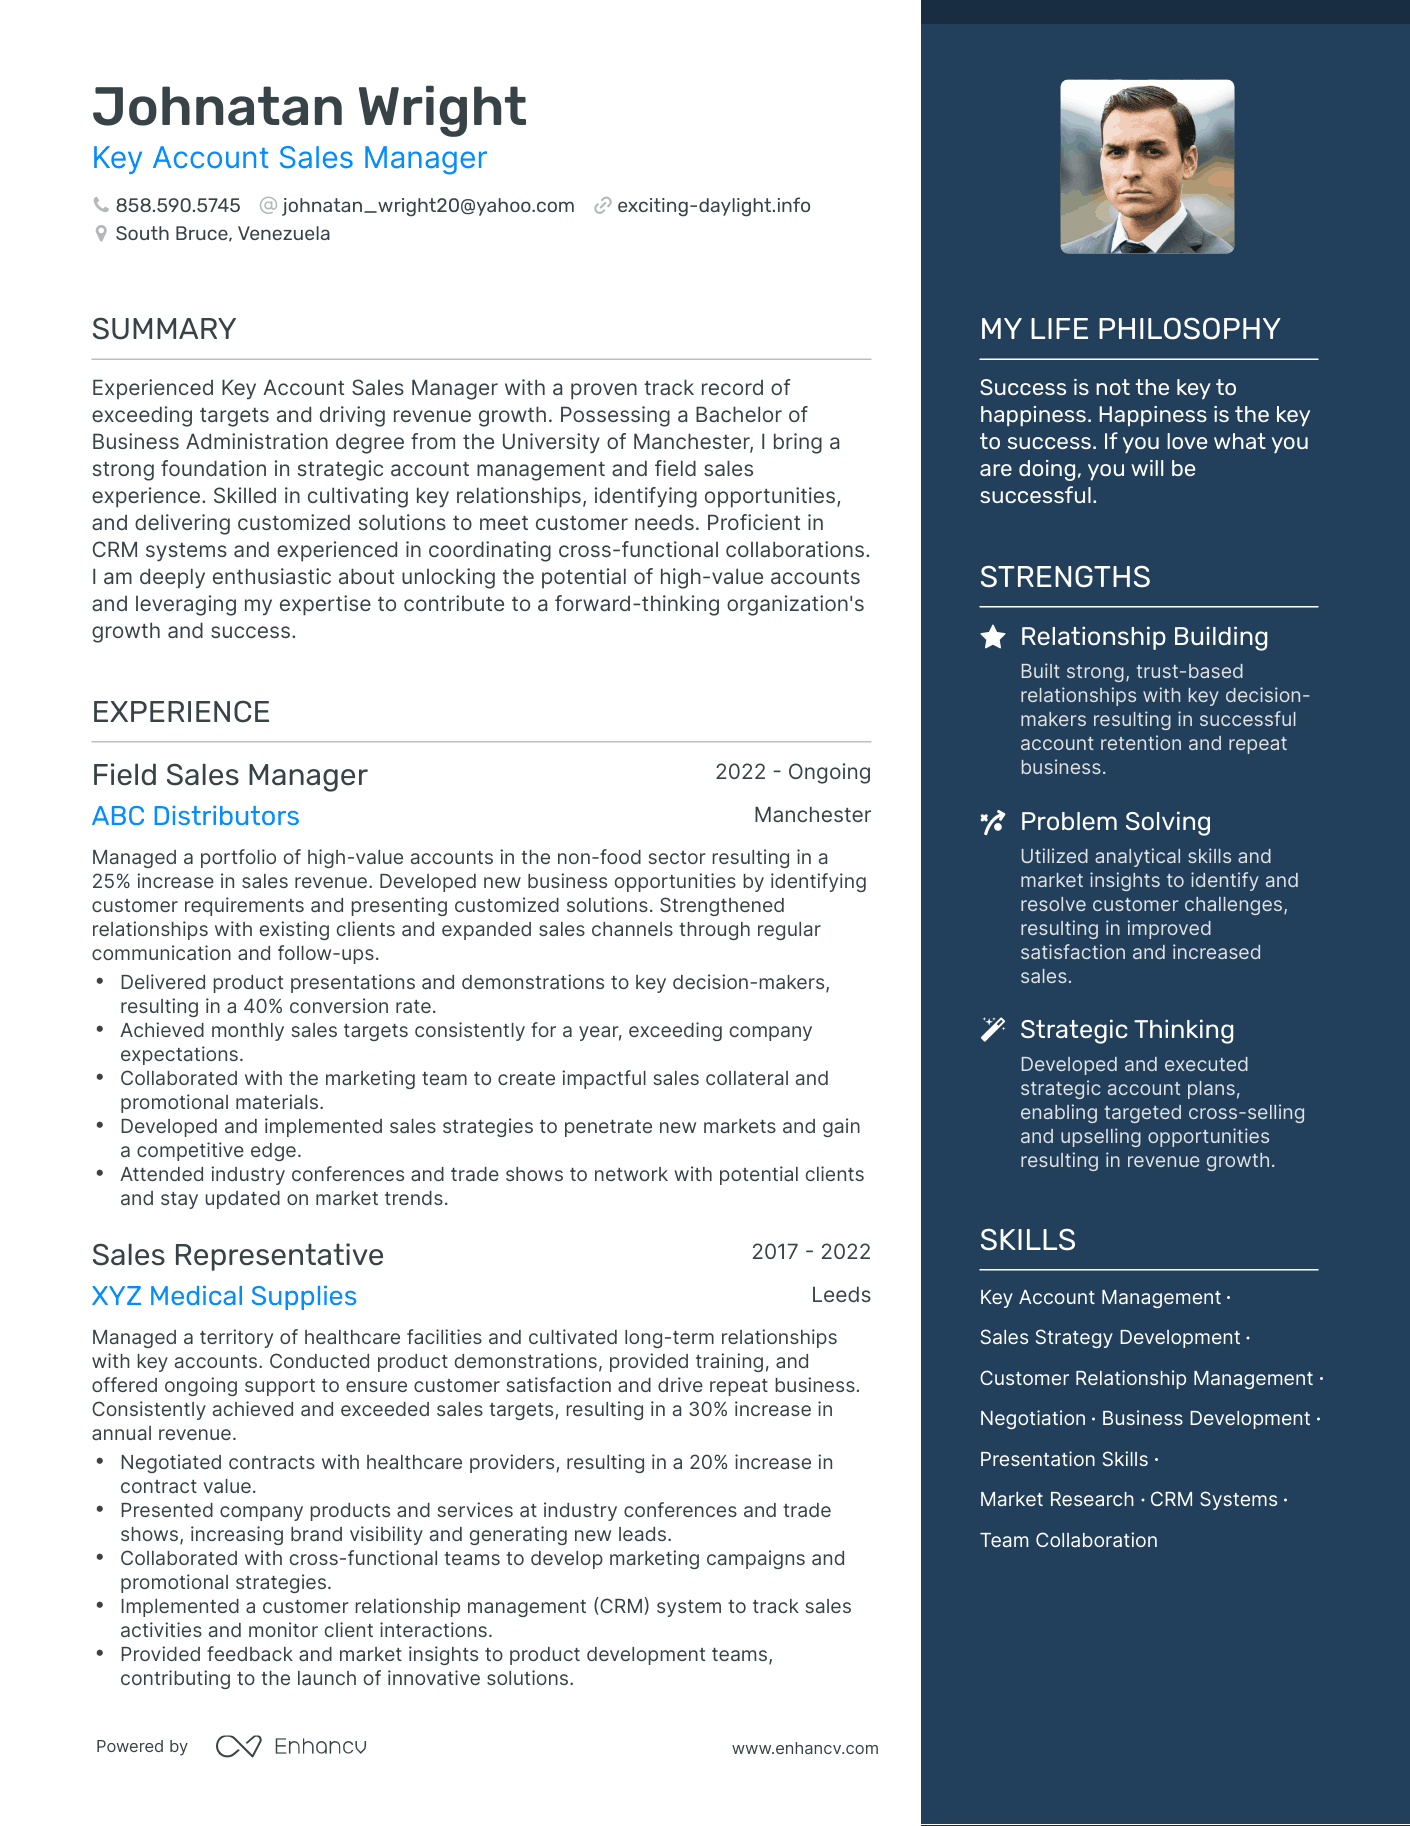 Key Account Sales Manager resume example